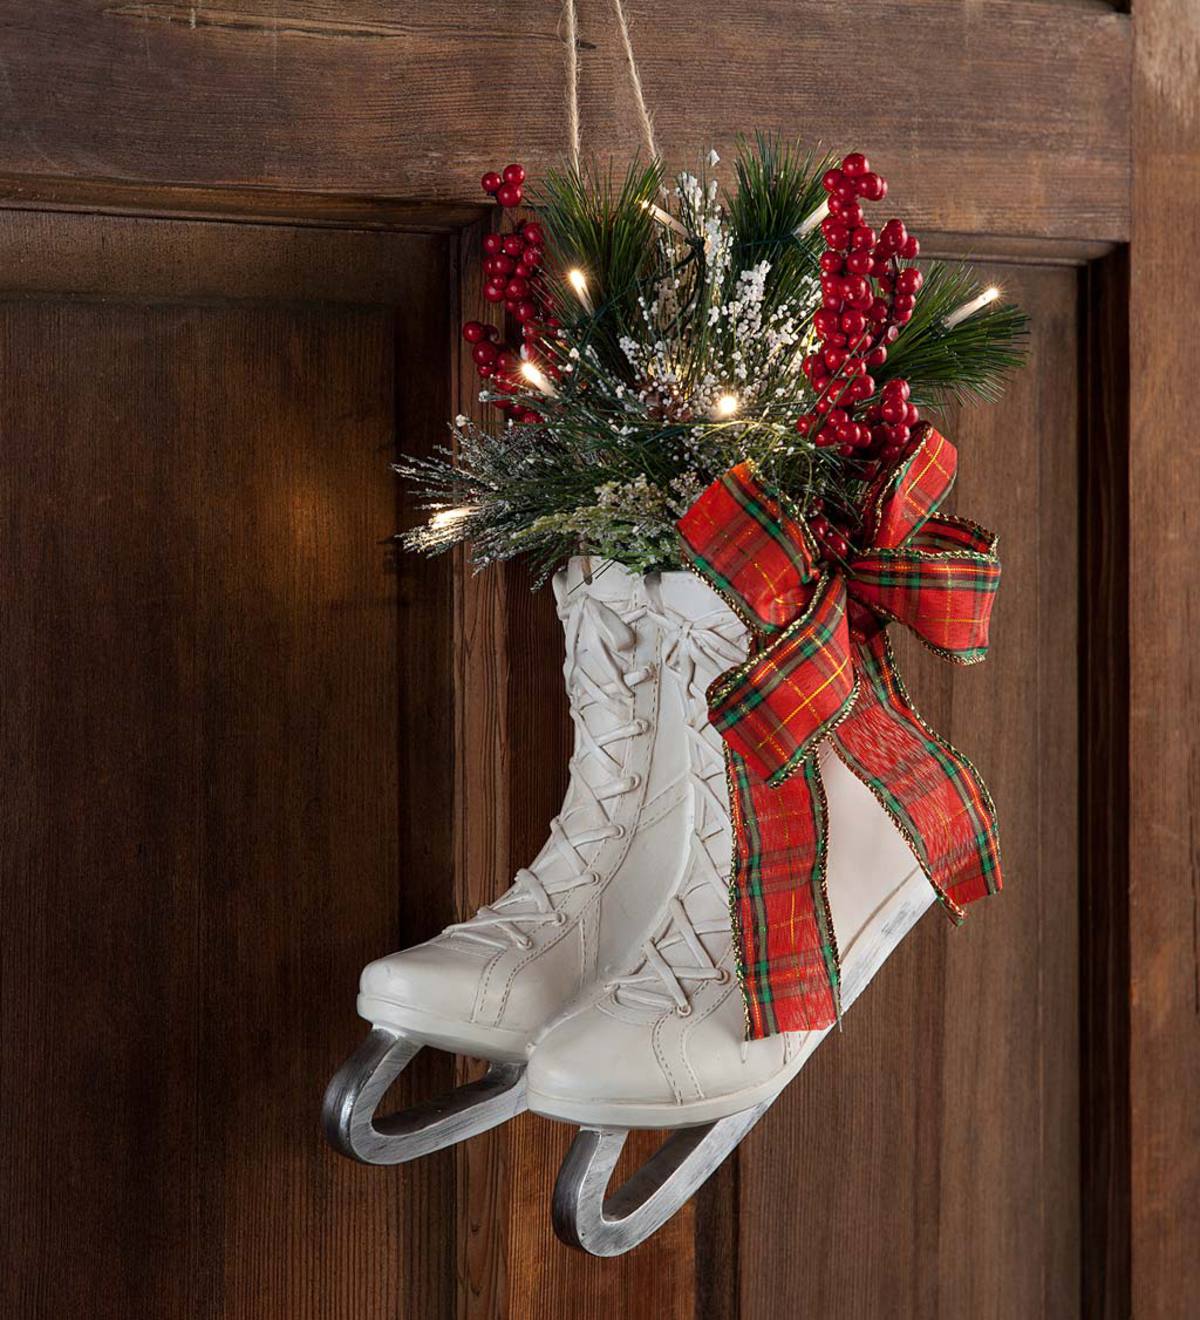 Creative ice skate decoration for christmas ideas to decorate your home